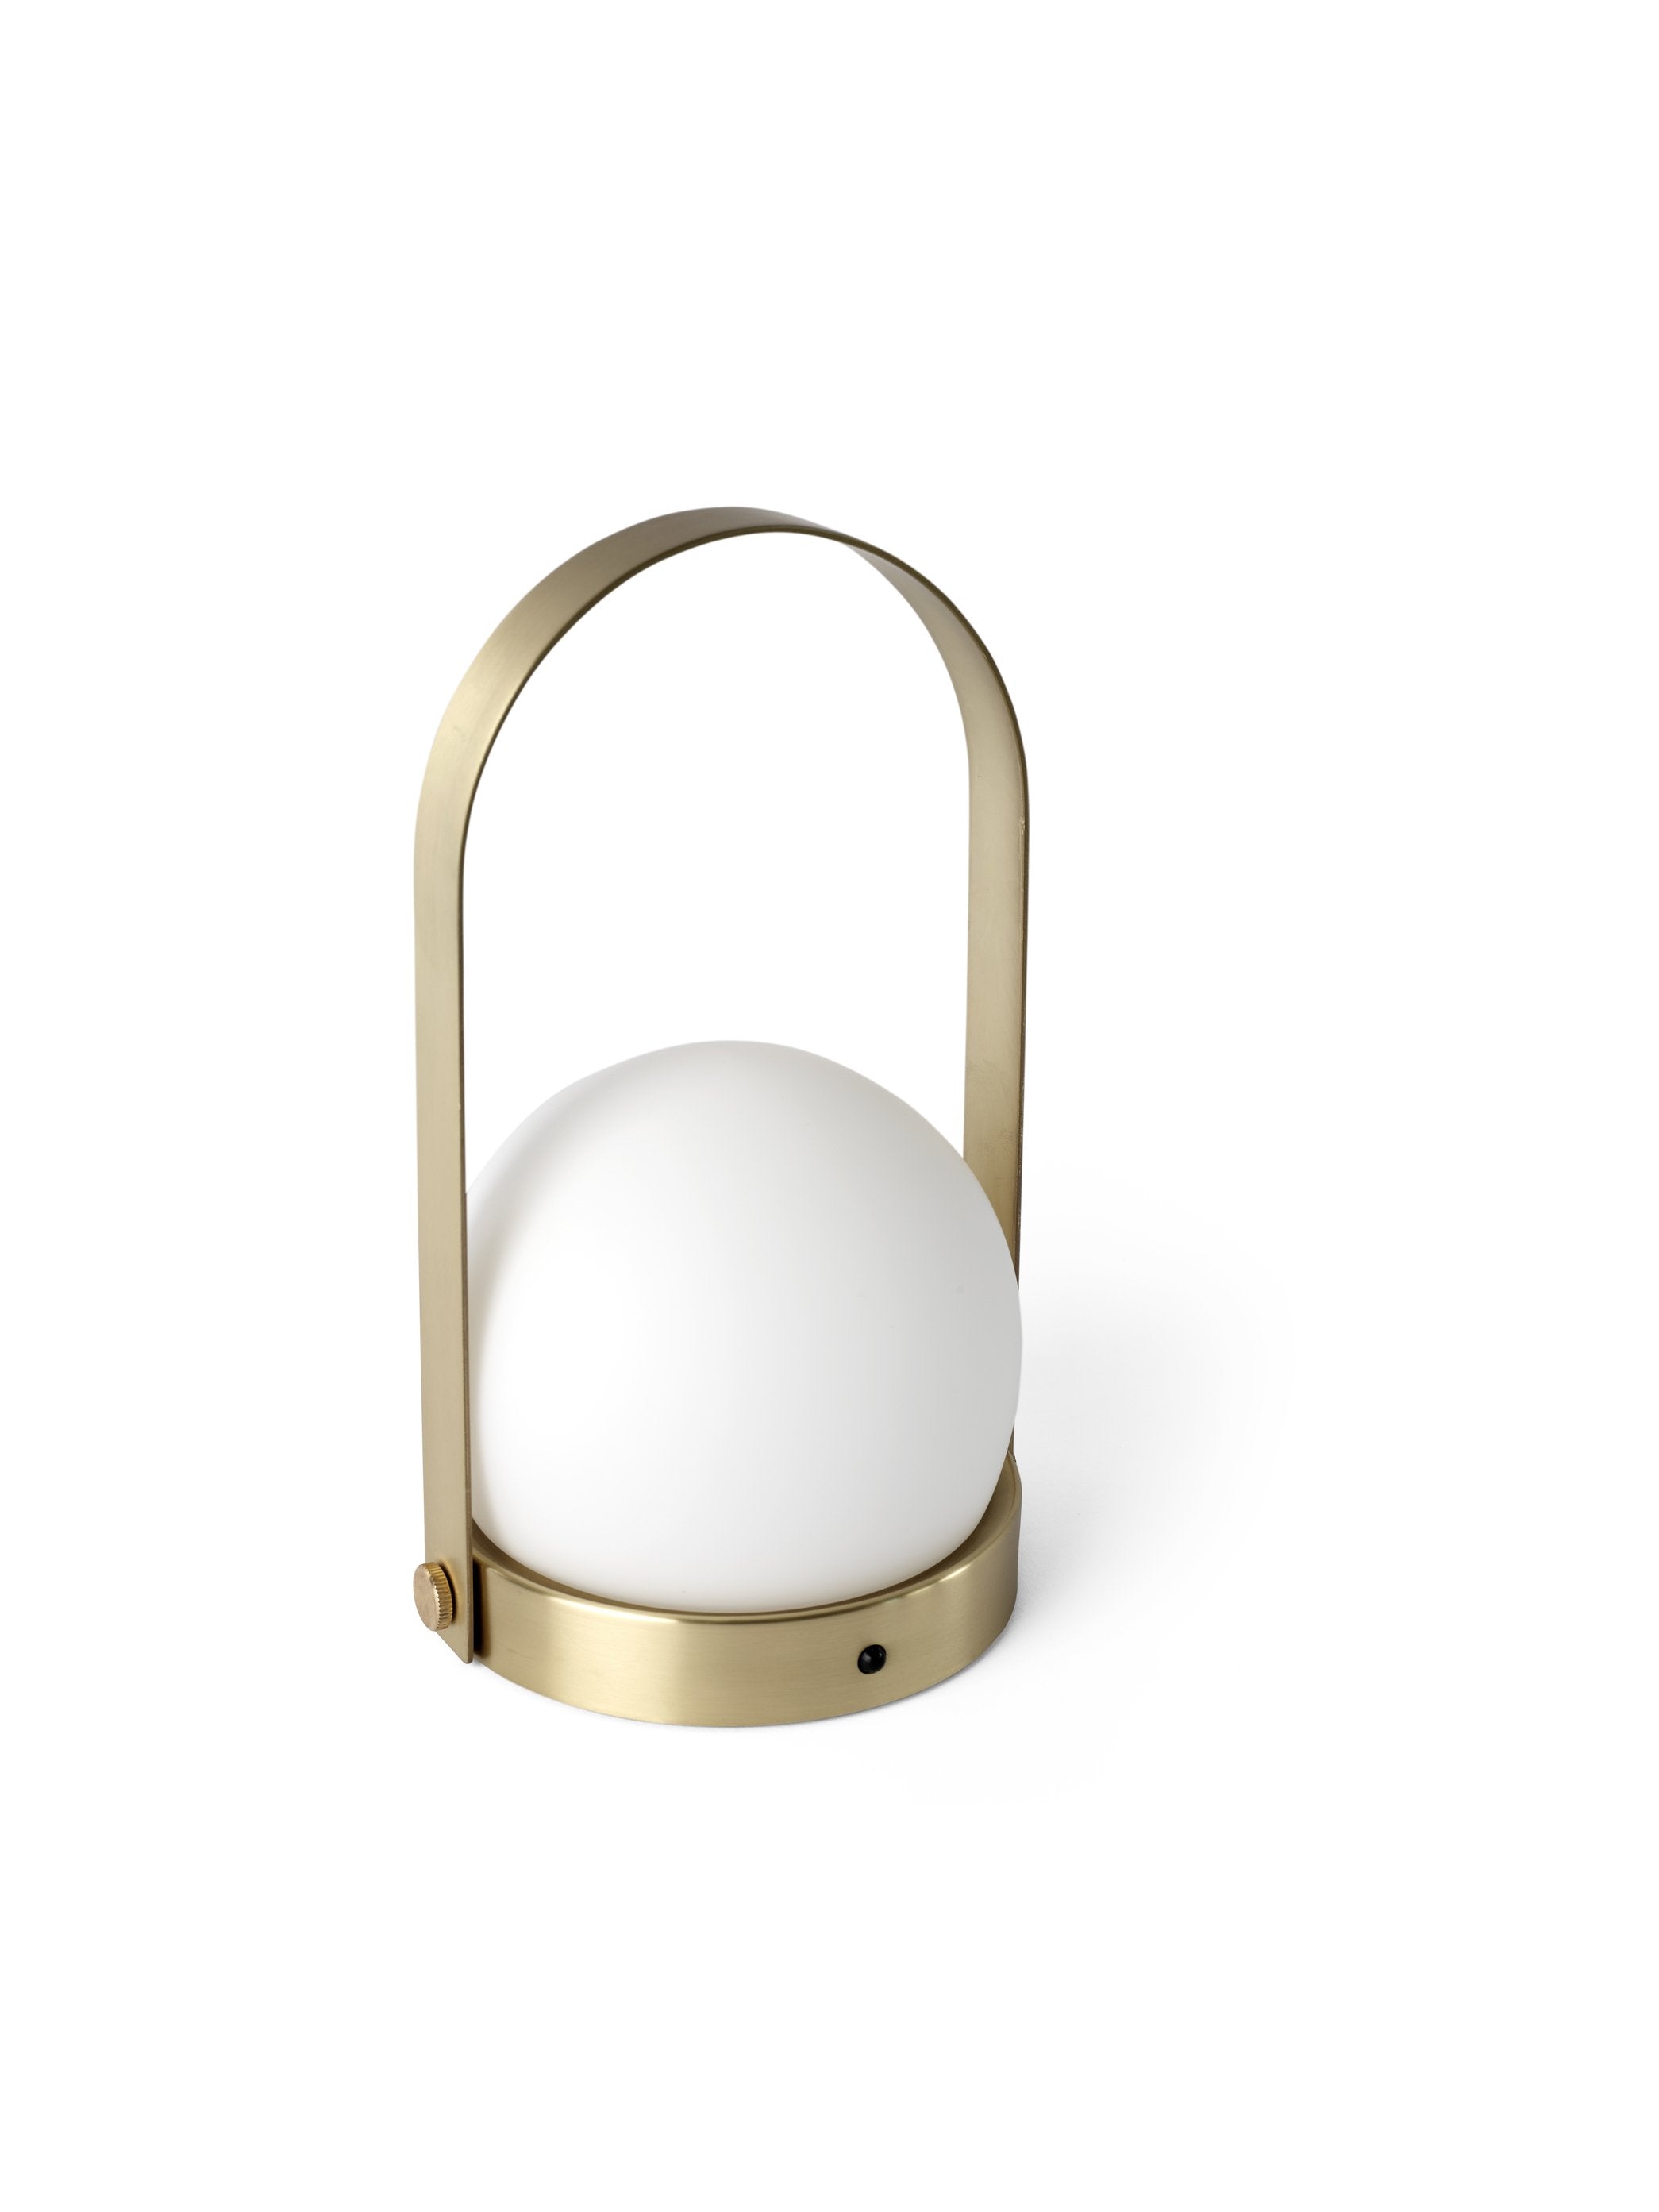 Carrie Portable LED Lamp in Brushed Brass design by Menu